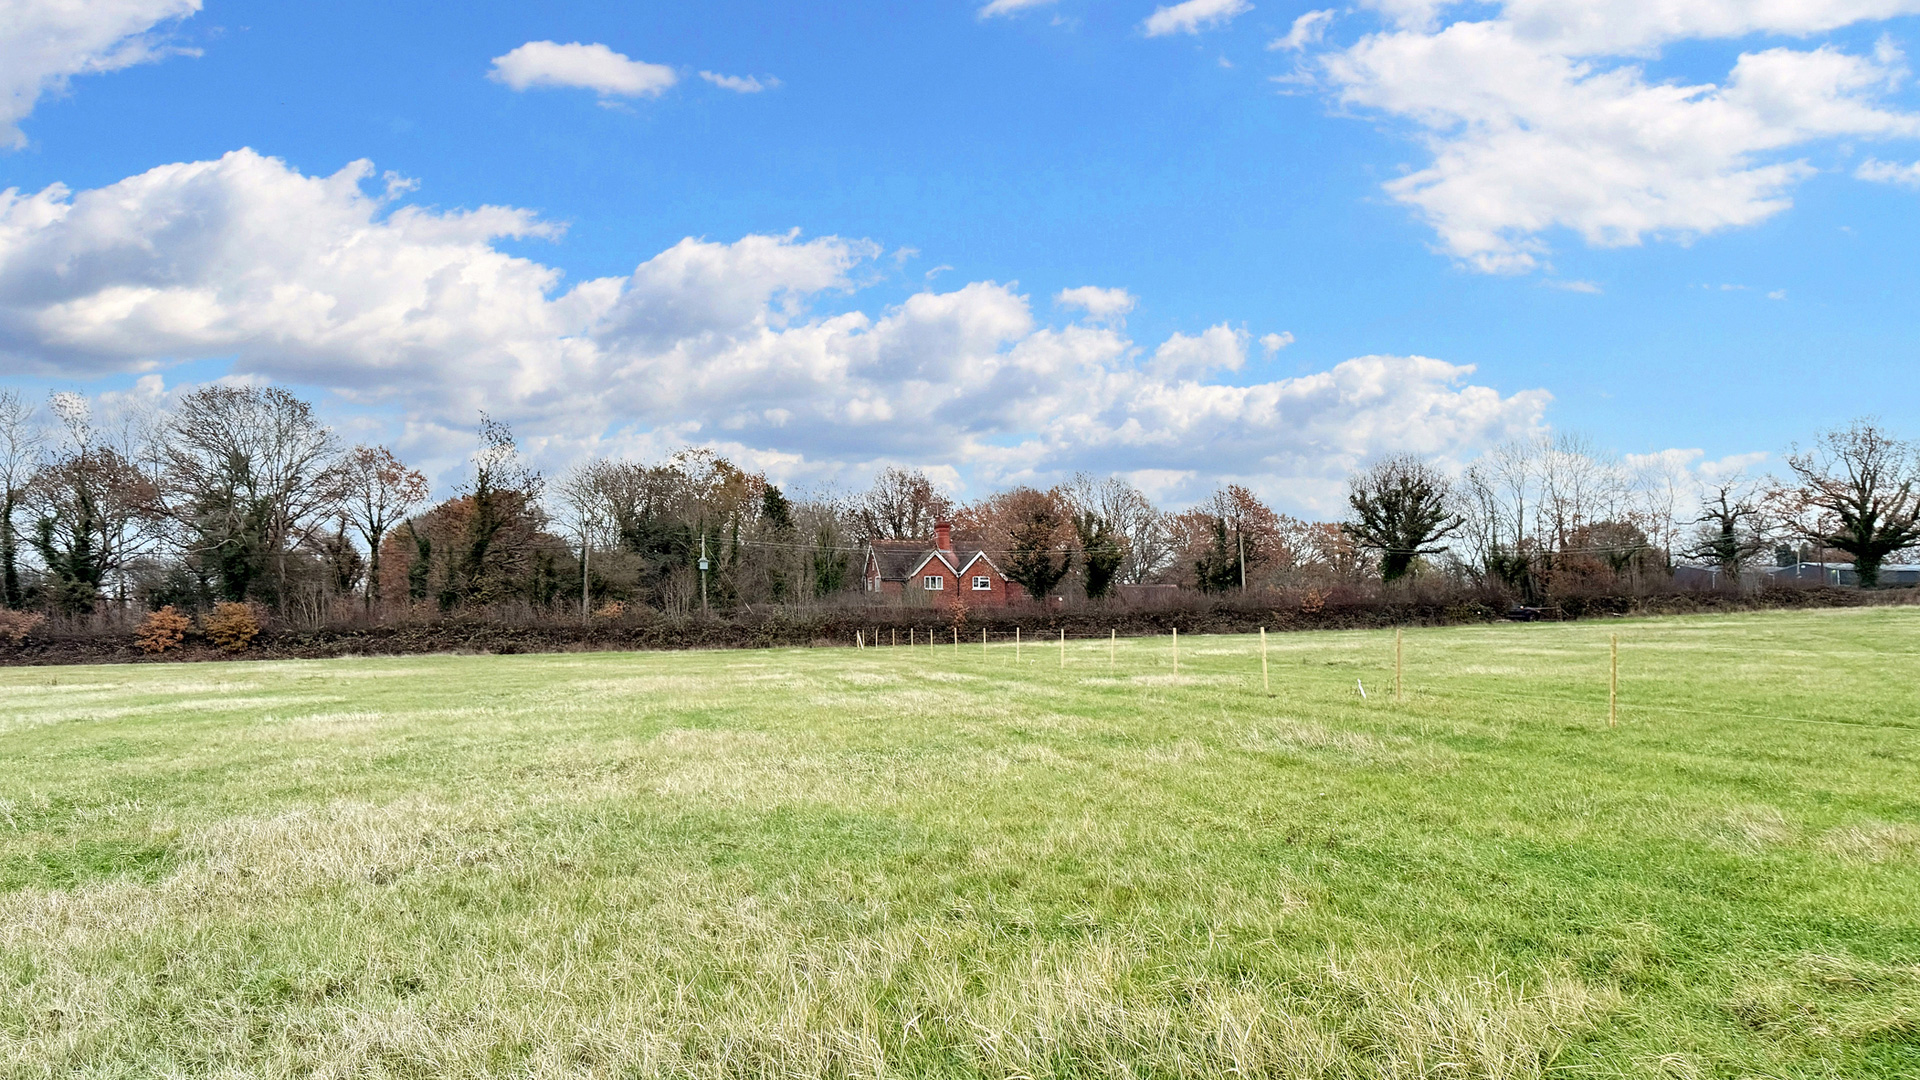 Land for sale in Newchapel, Lingfield road frontage